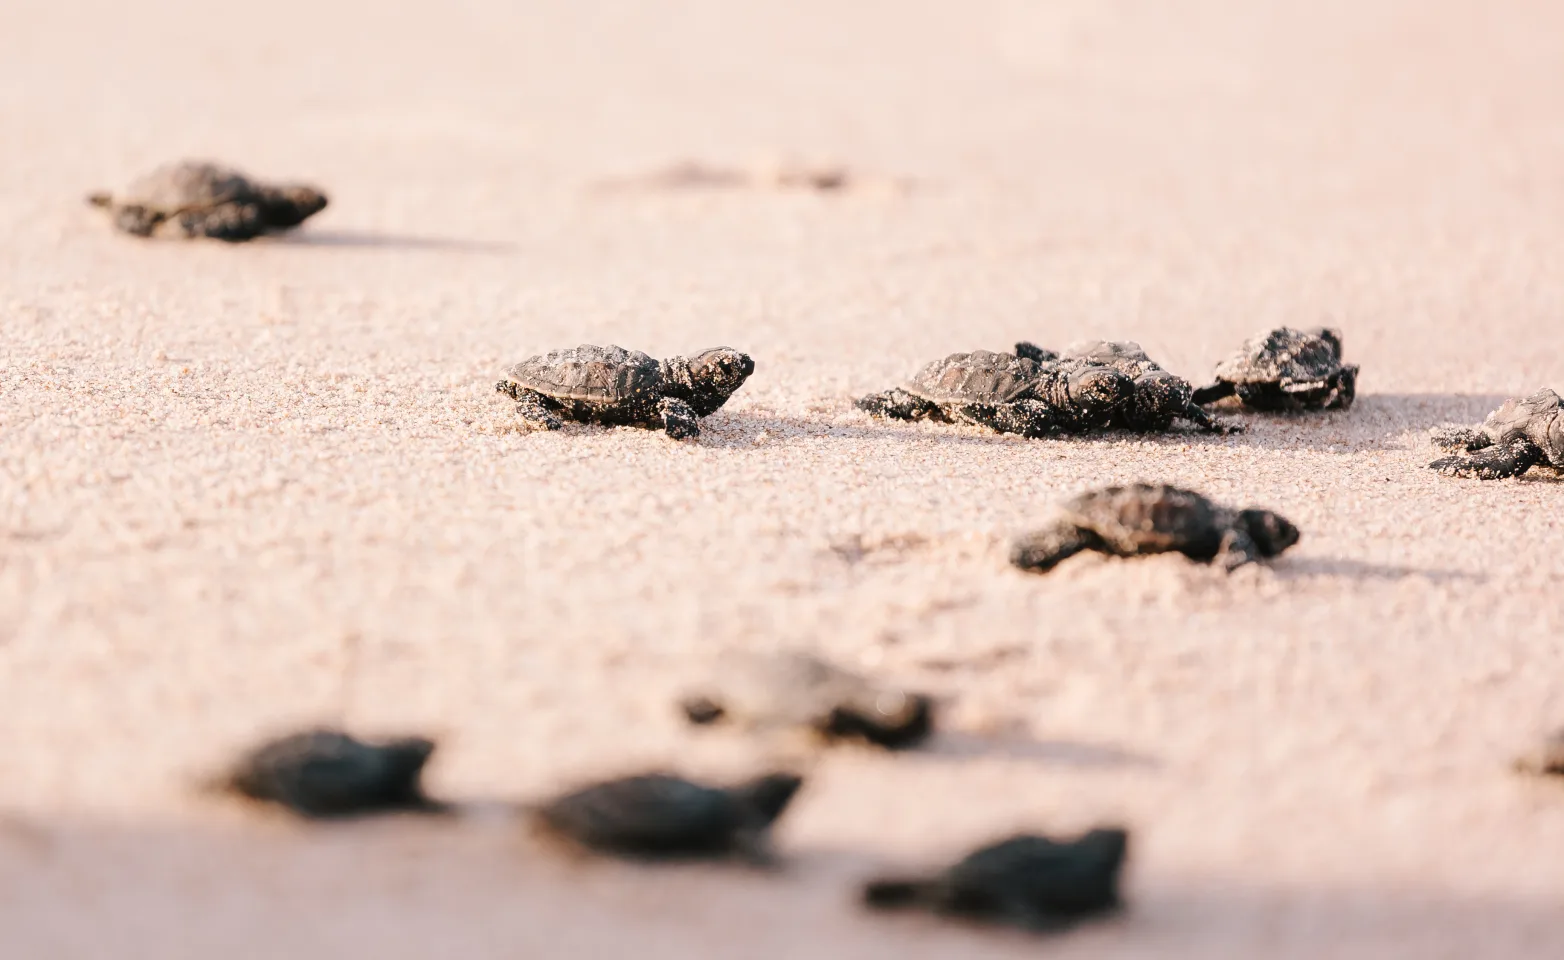 Baby turtles on the beach.